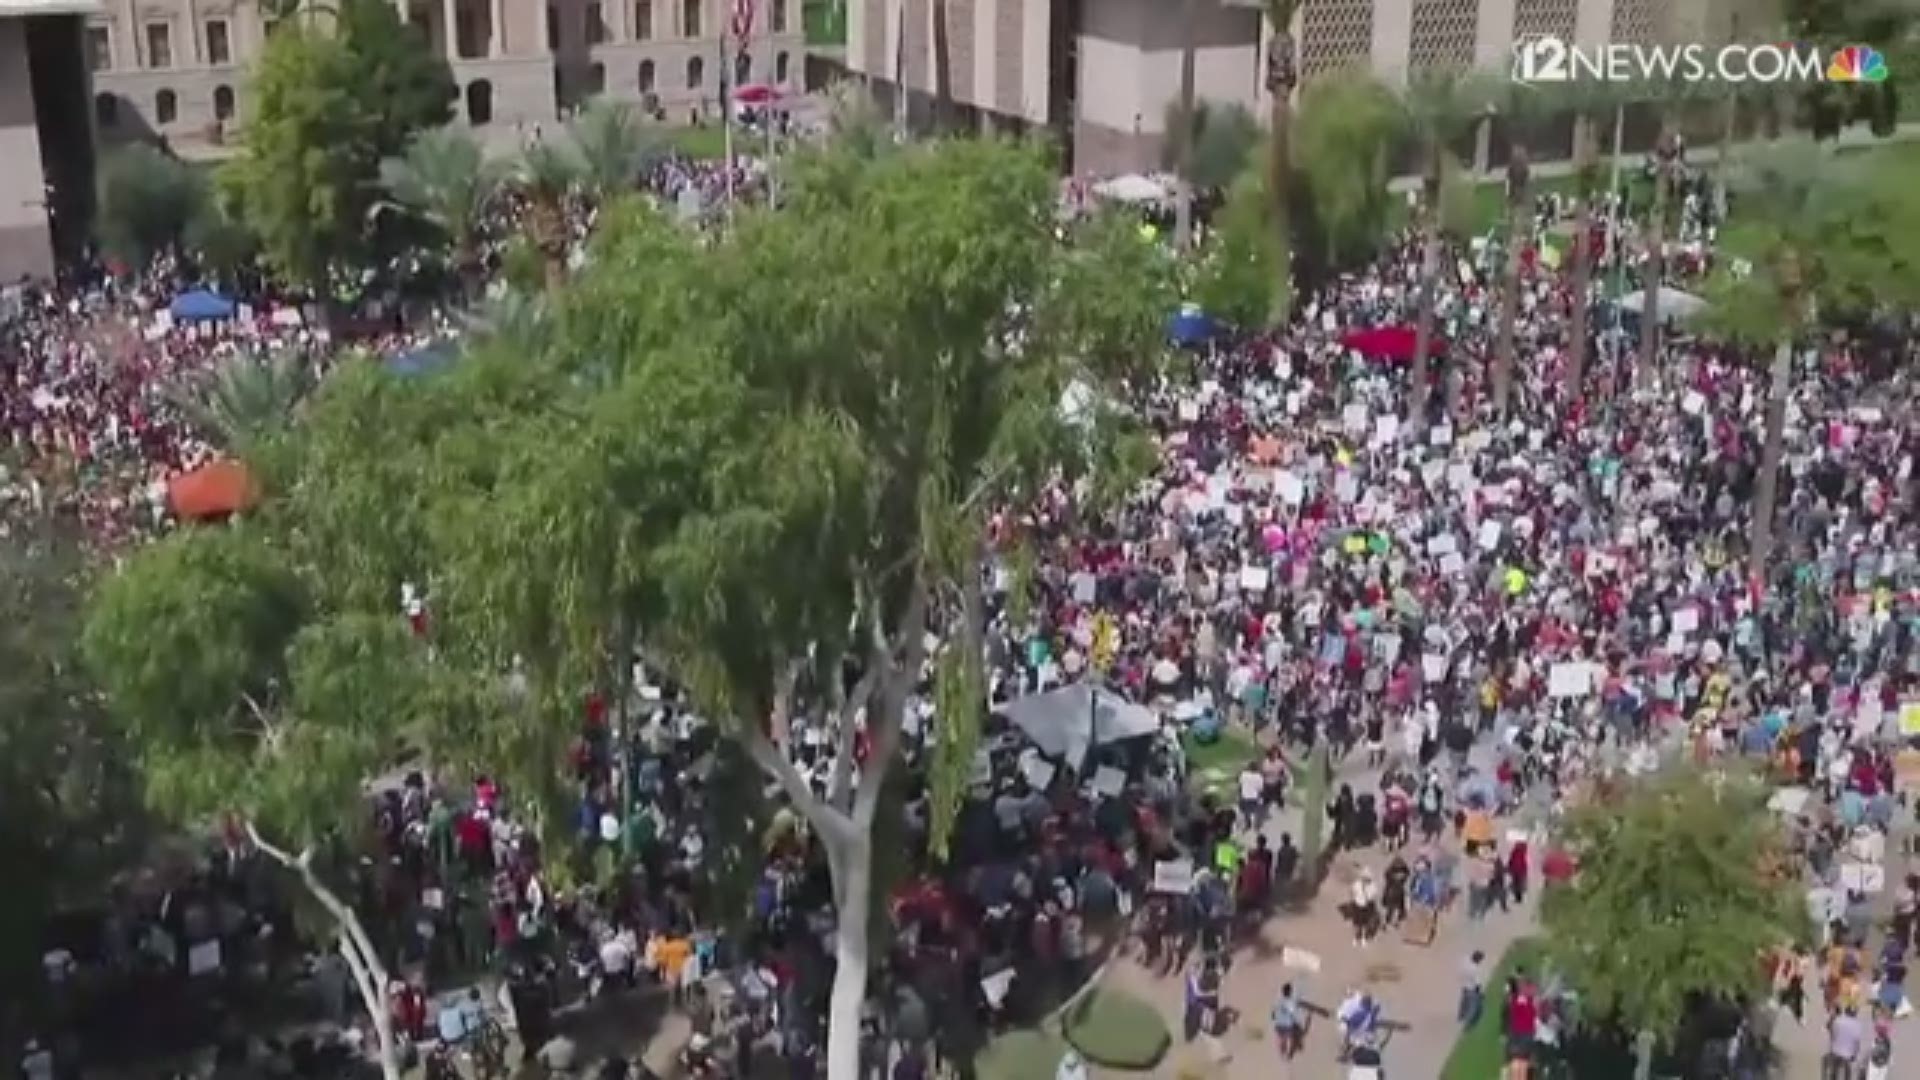 Thousands gathered at the Arizona State Capitol for the 'March for Our Lives' rally.